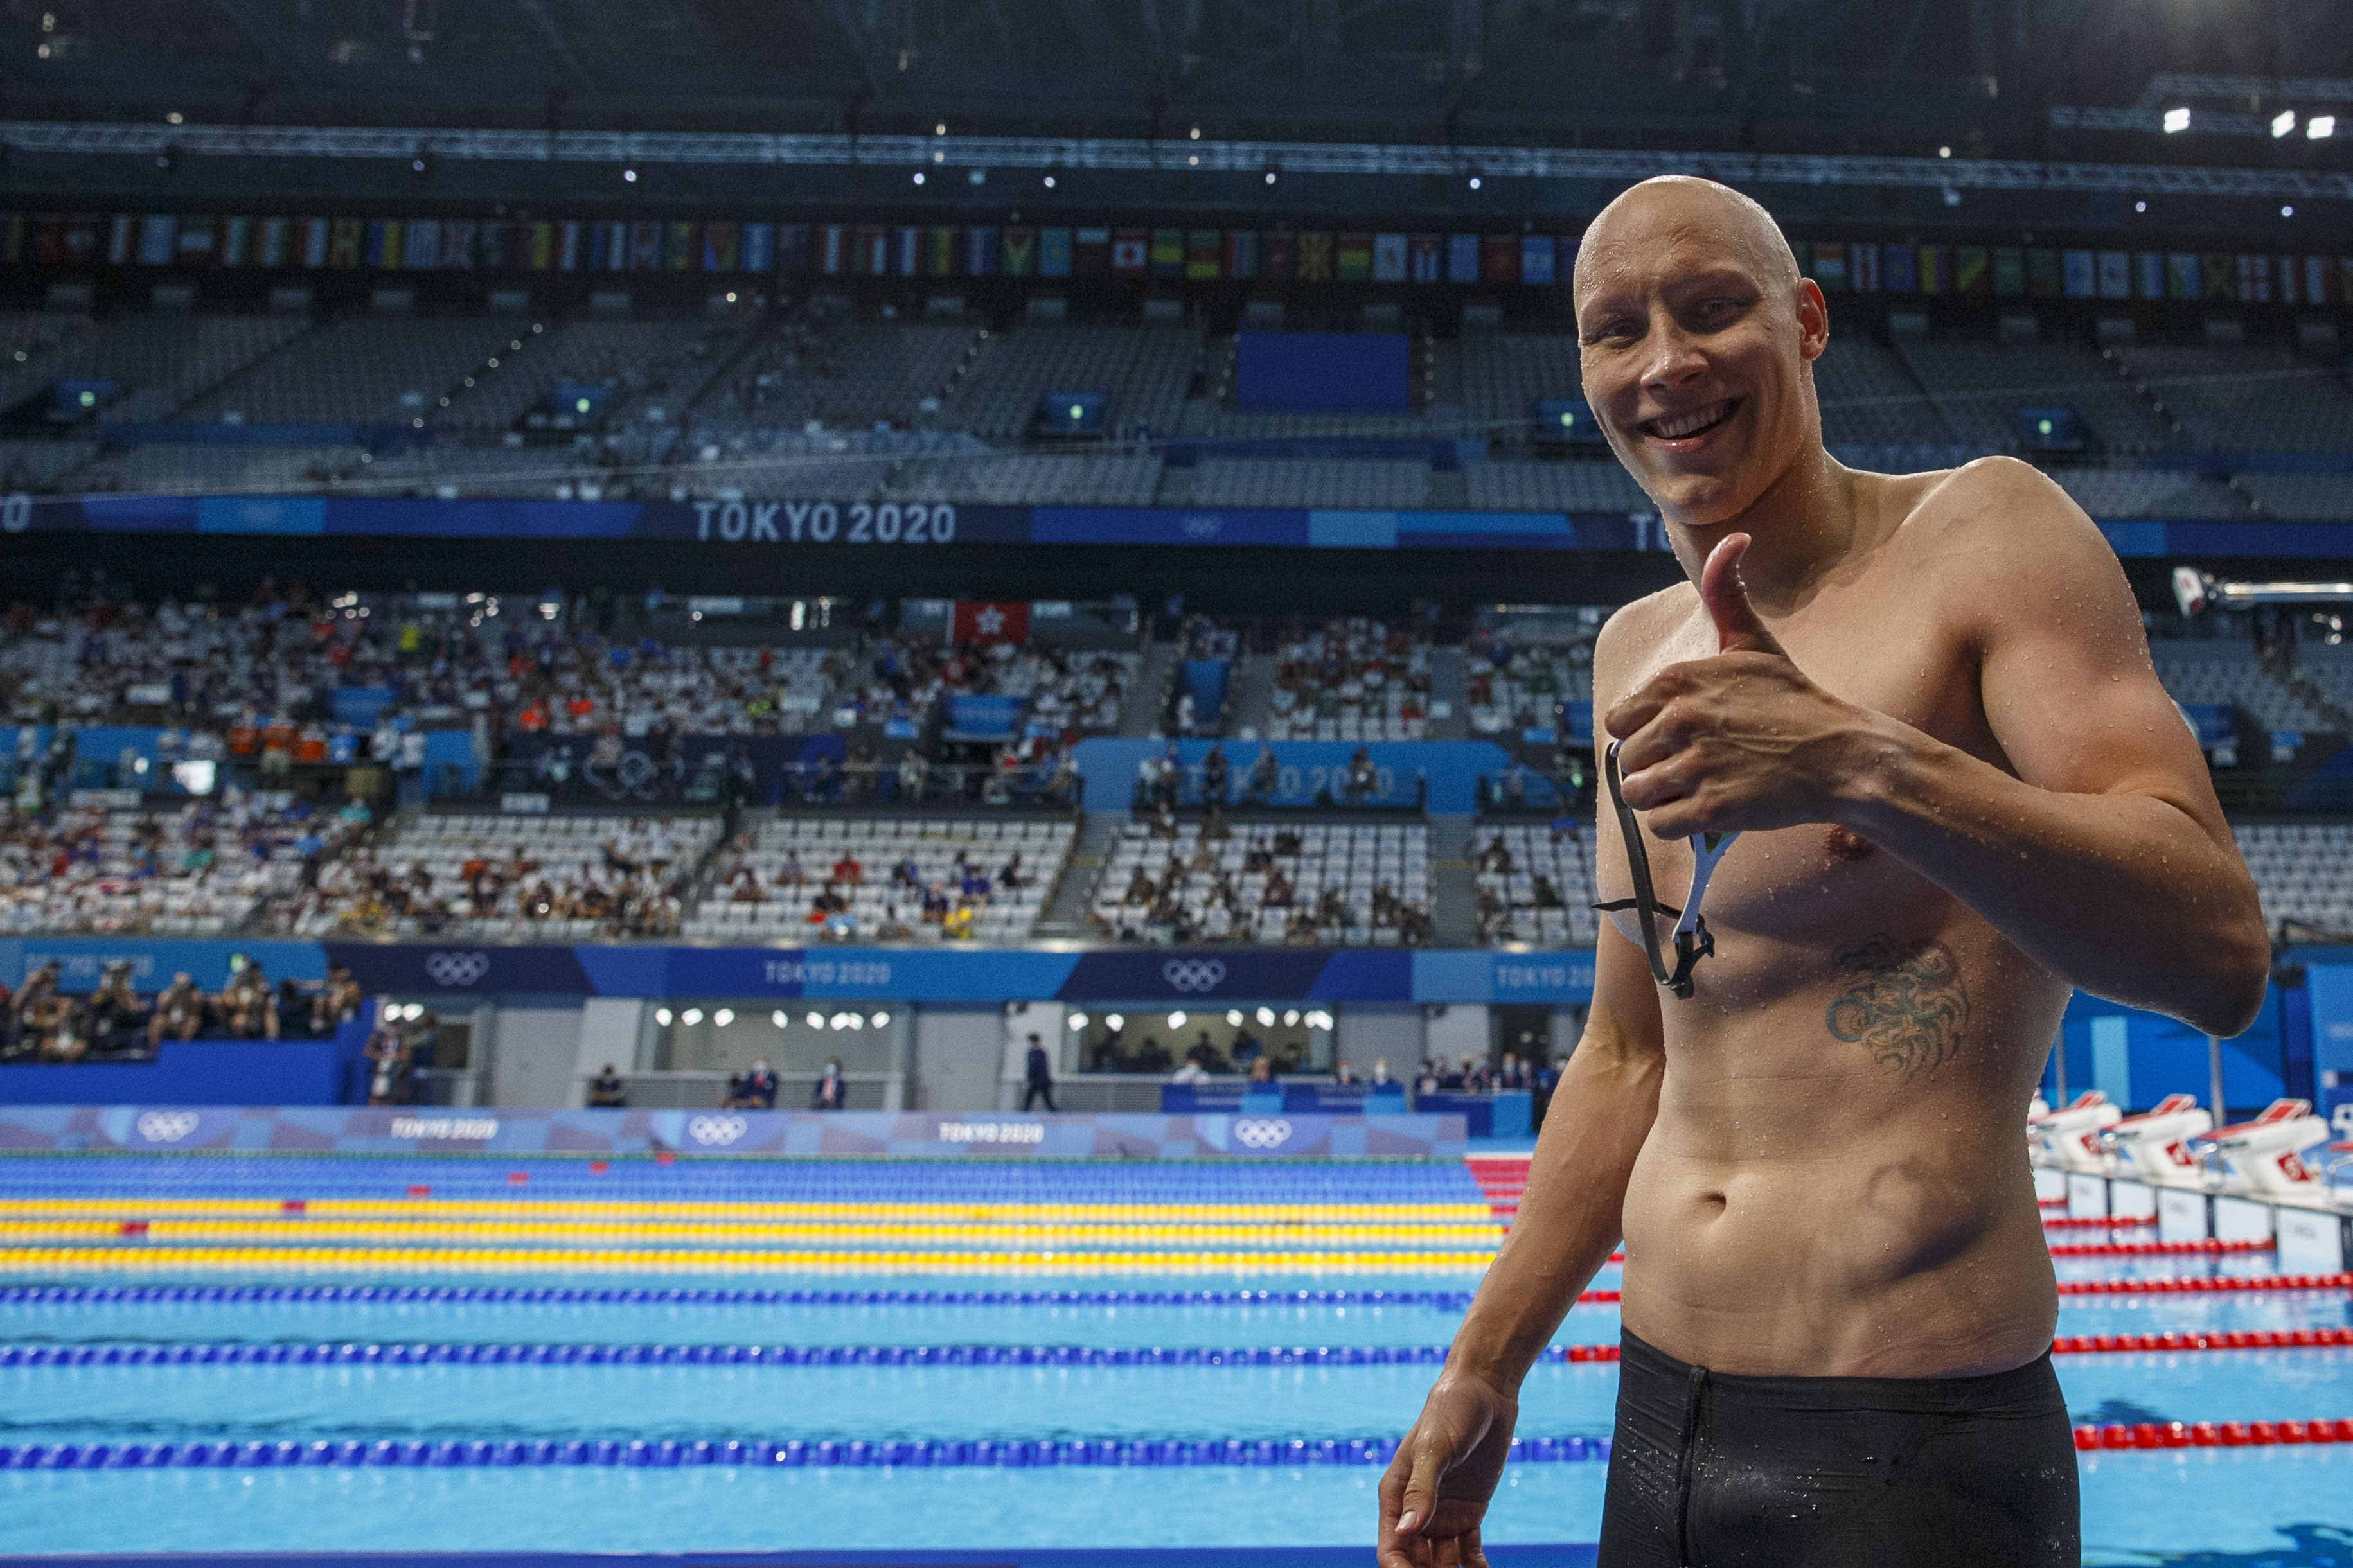 Swimmer Mattsson won Finland’s first medal at the Tokyo Olympics